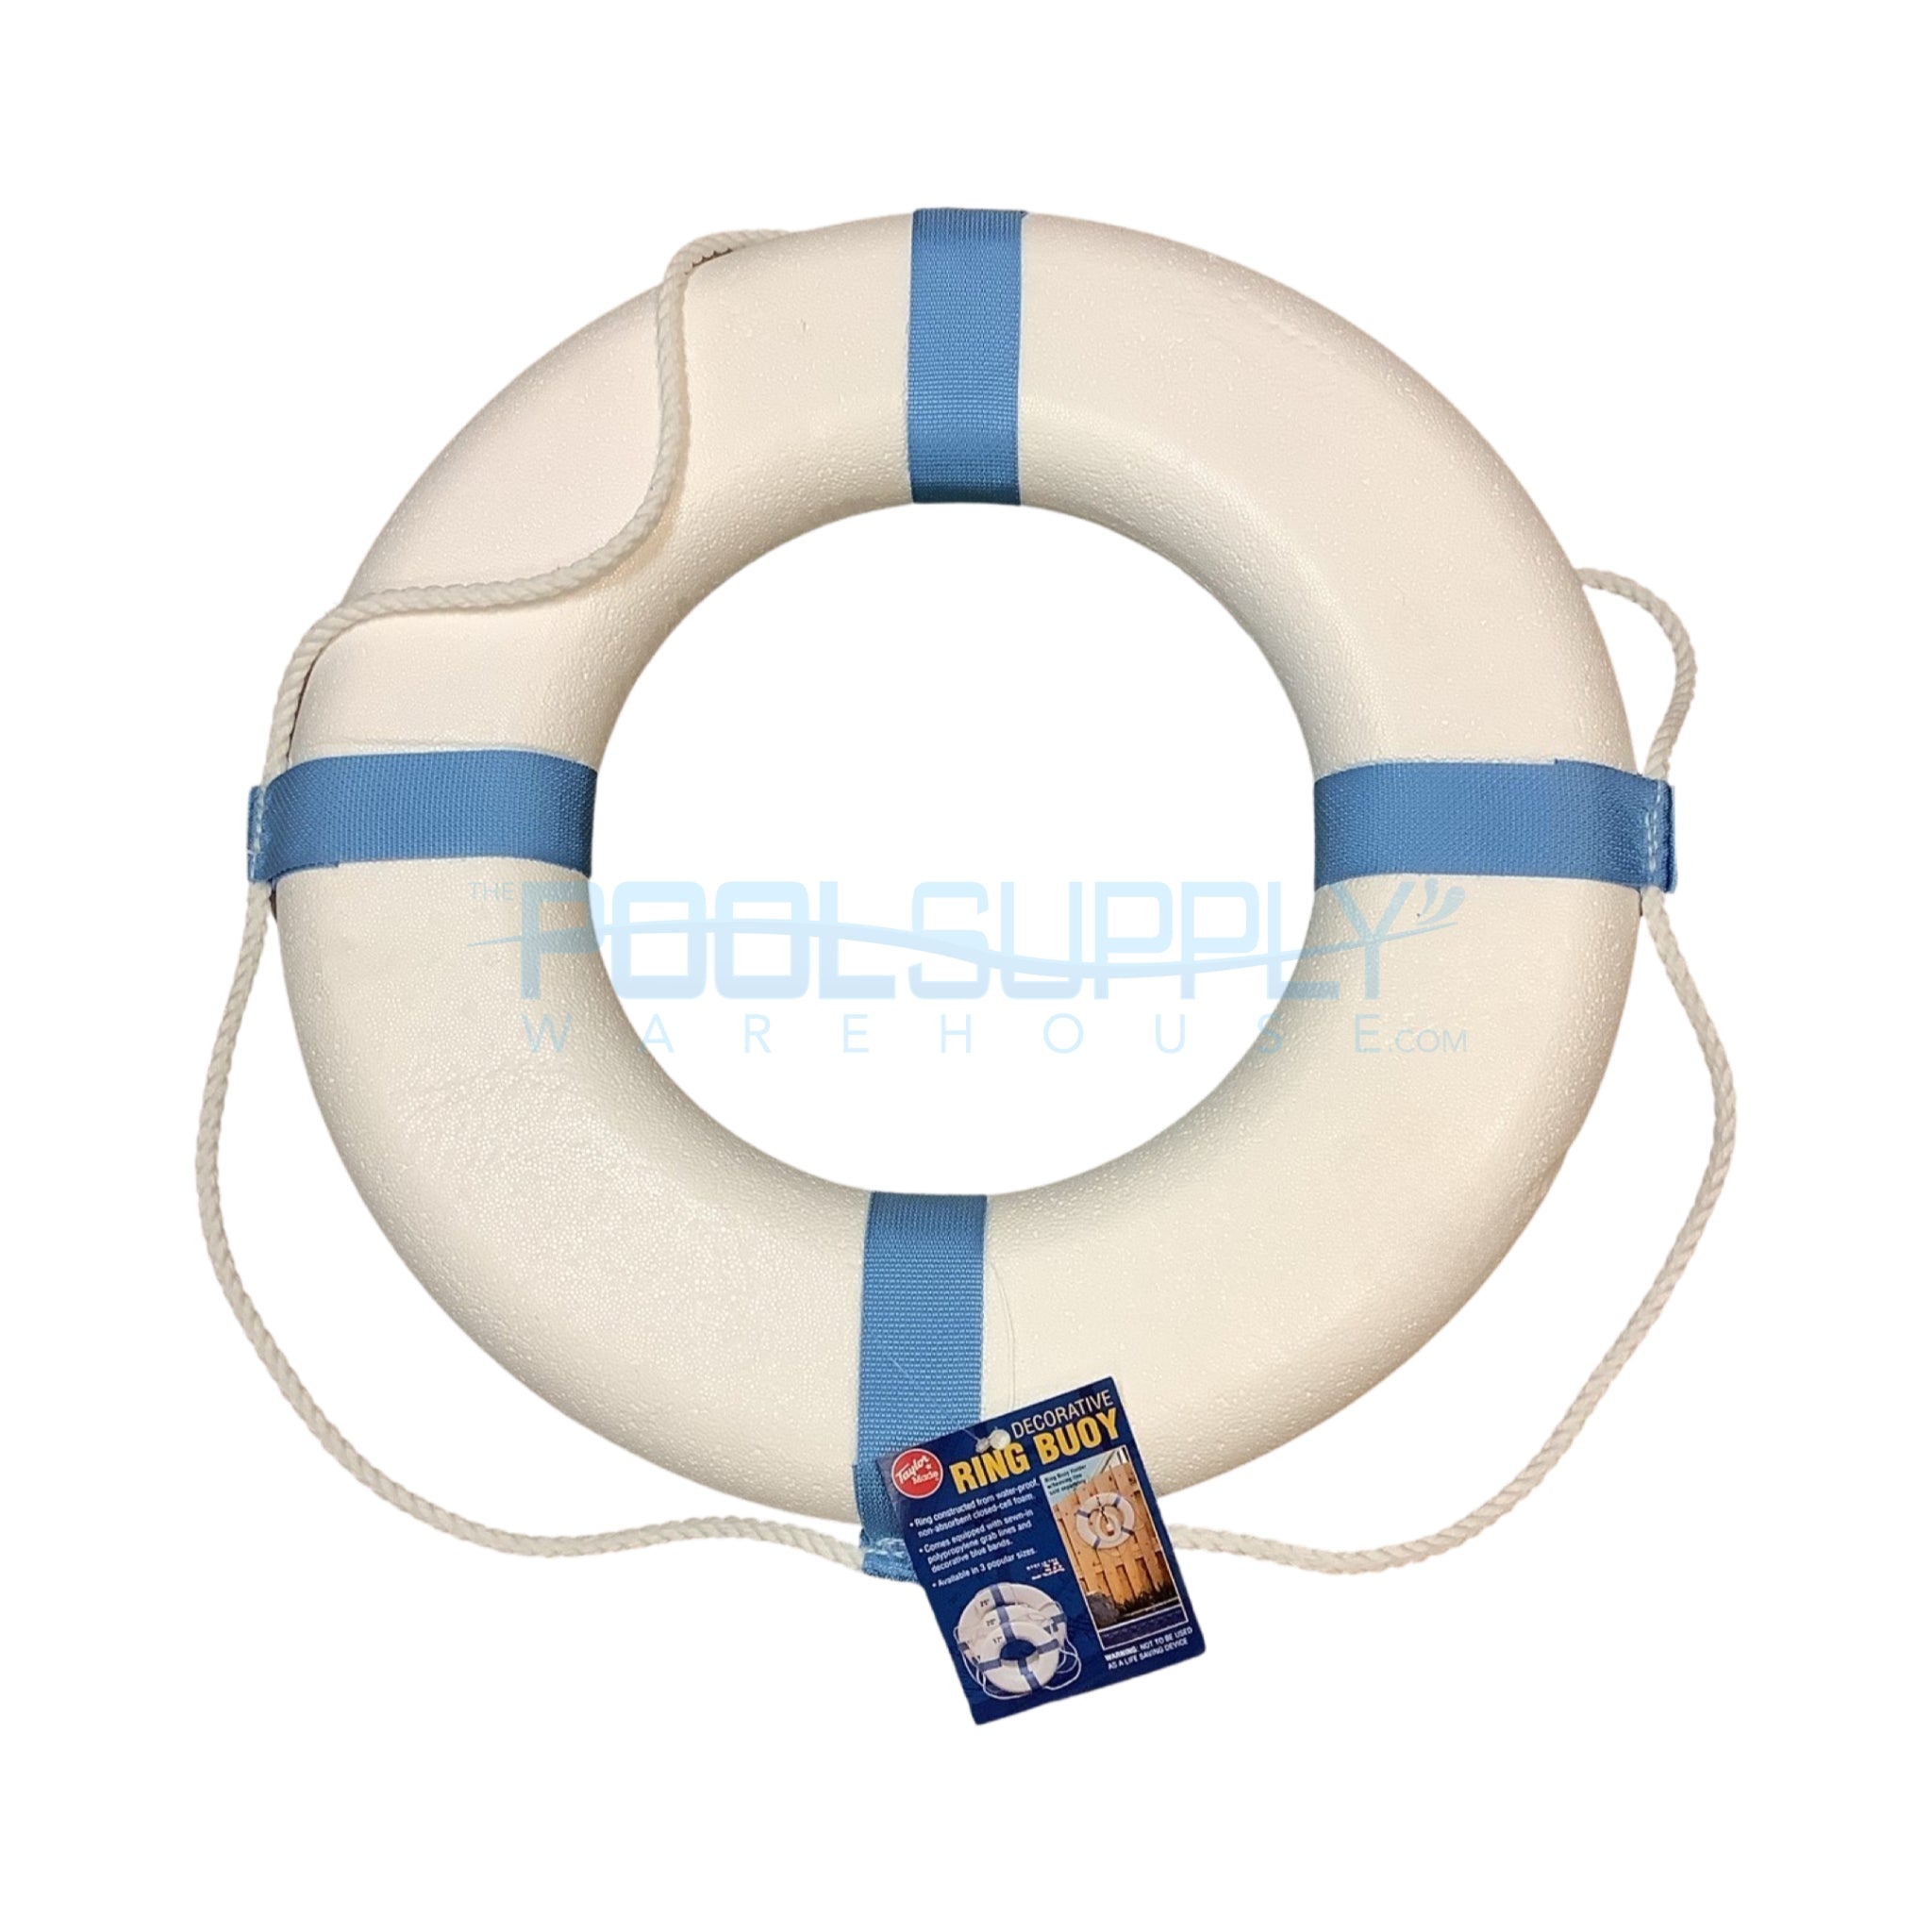 PoolStyle Decorative White Ring Buoy, 24" - 373 - The Pool Supply Warehouse